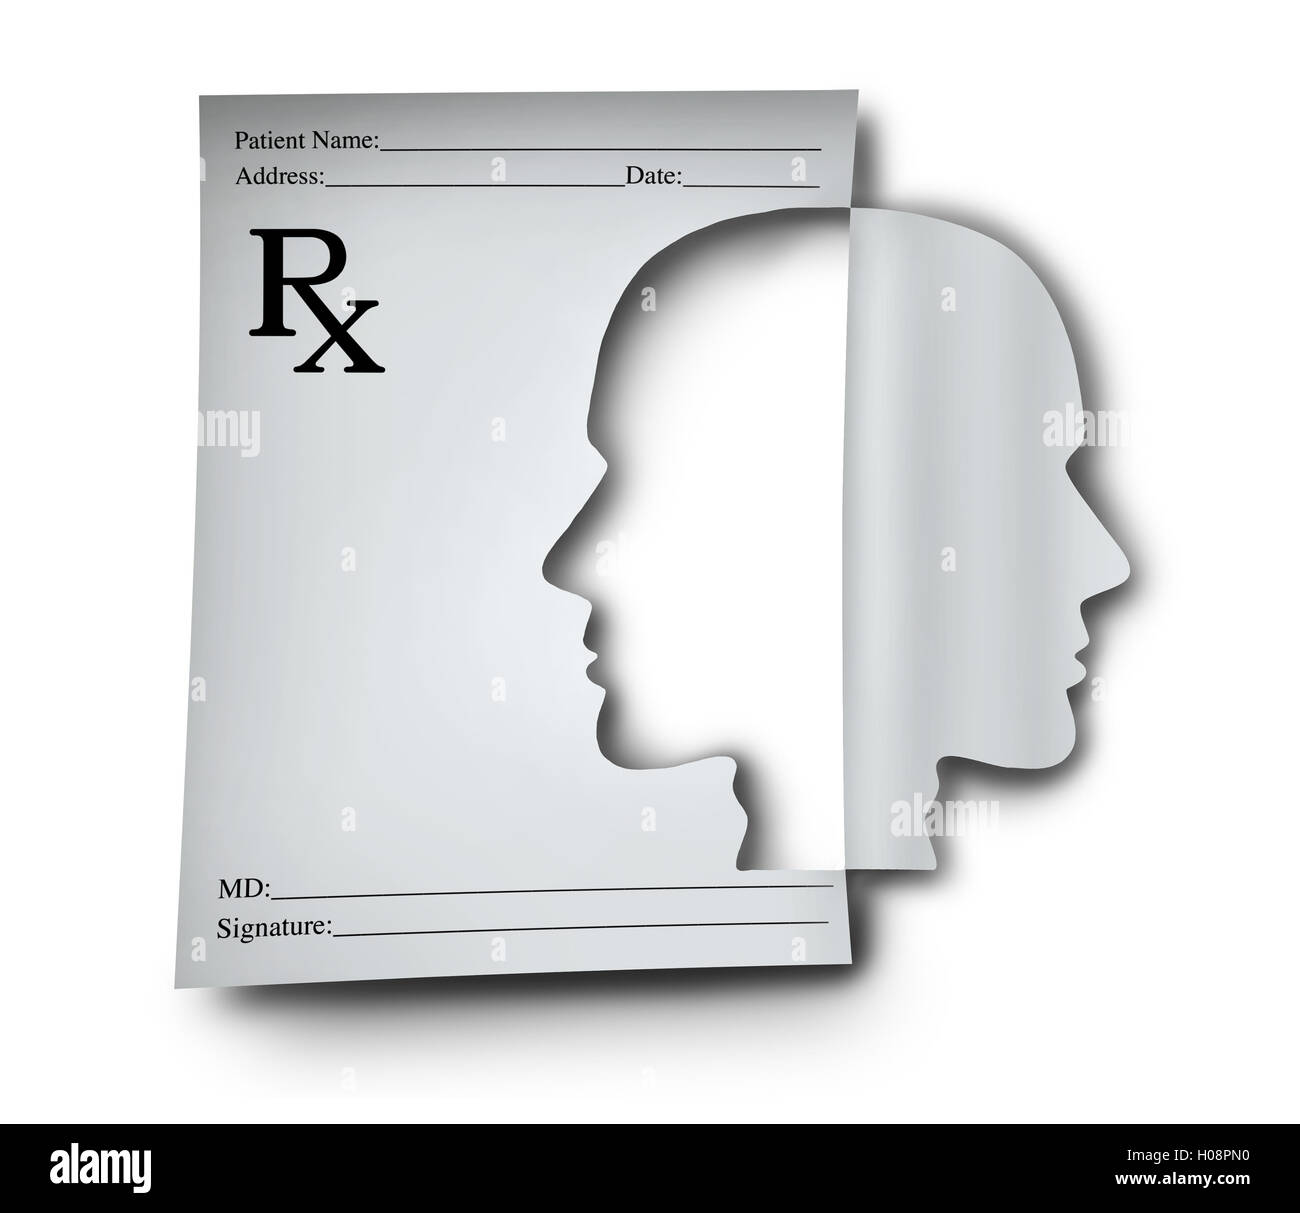 Mental health medication and psychiatric medicine concept as a doctor prescription note shaped as a human head as a medical symbol for brain illness or cognitive disorder with 3D illustration elements. Stock Photo